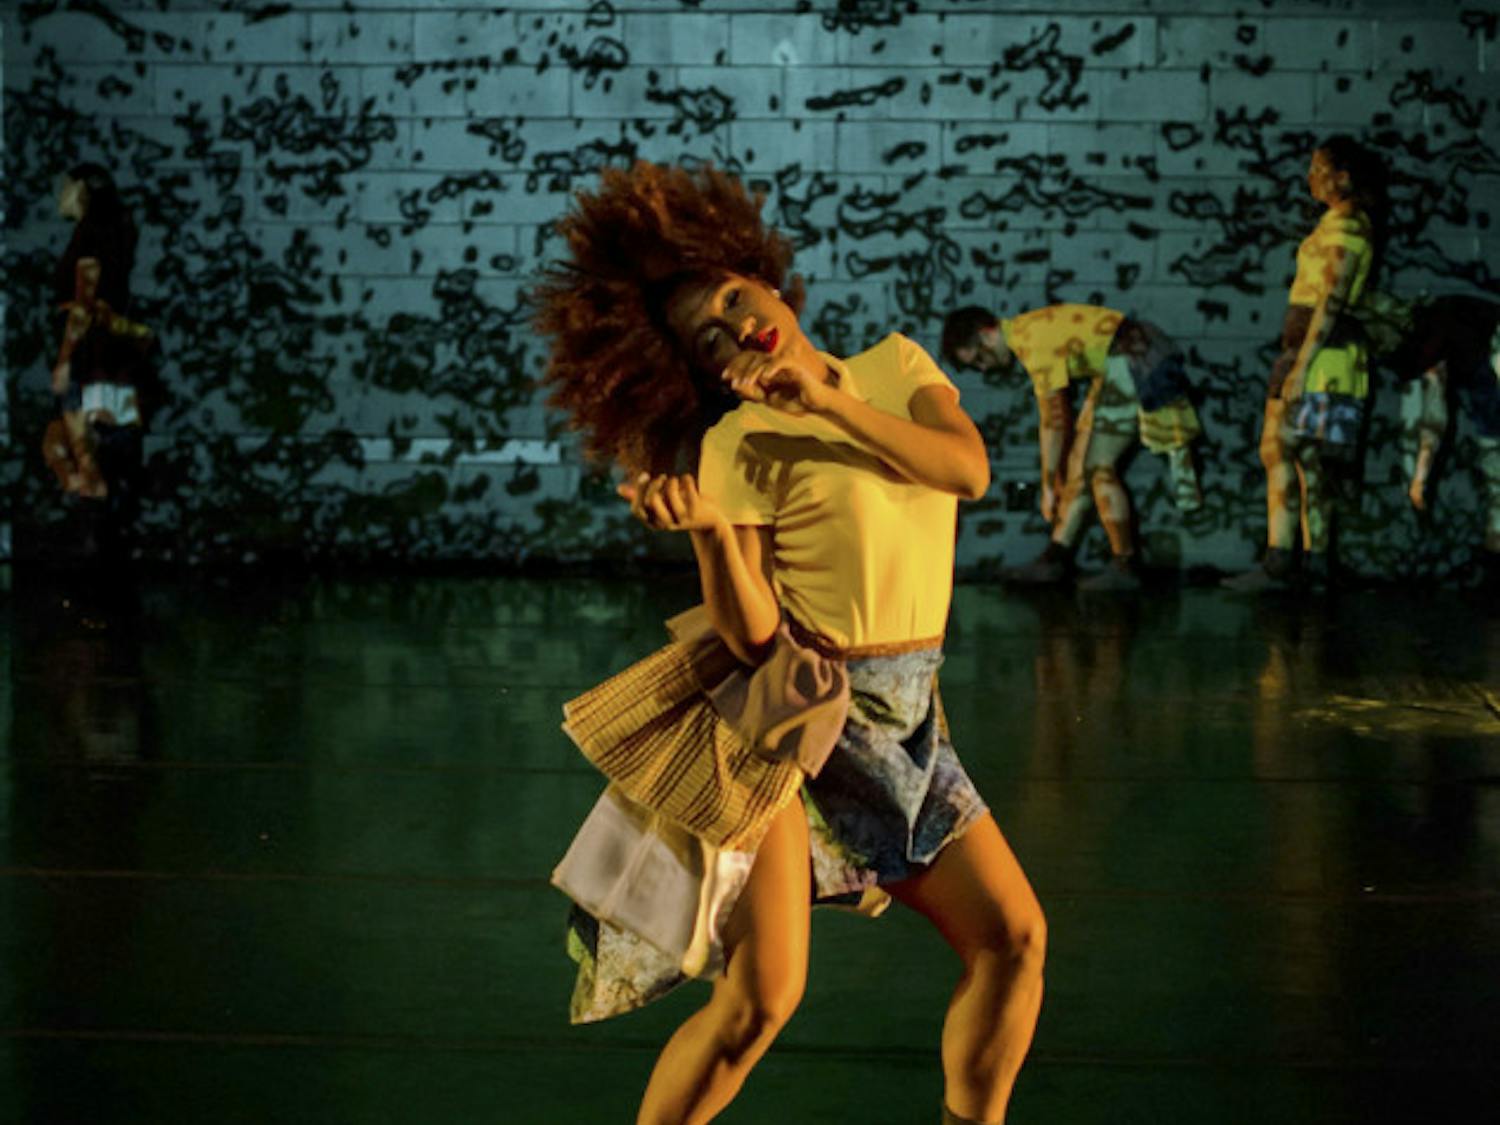 UF’s College of Arts will host Swamp Dance Fest, which brings together dancers to train in contemporary techniques with renowned choreographers from around the country.